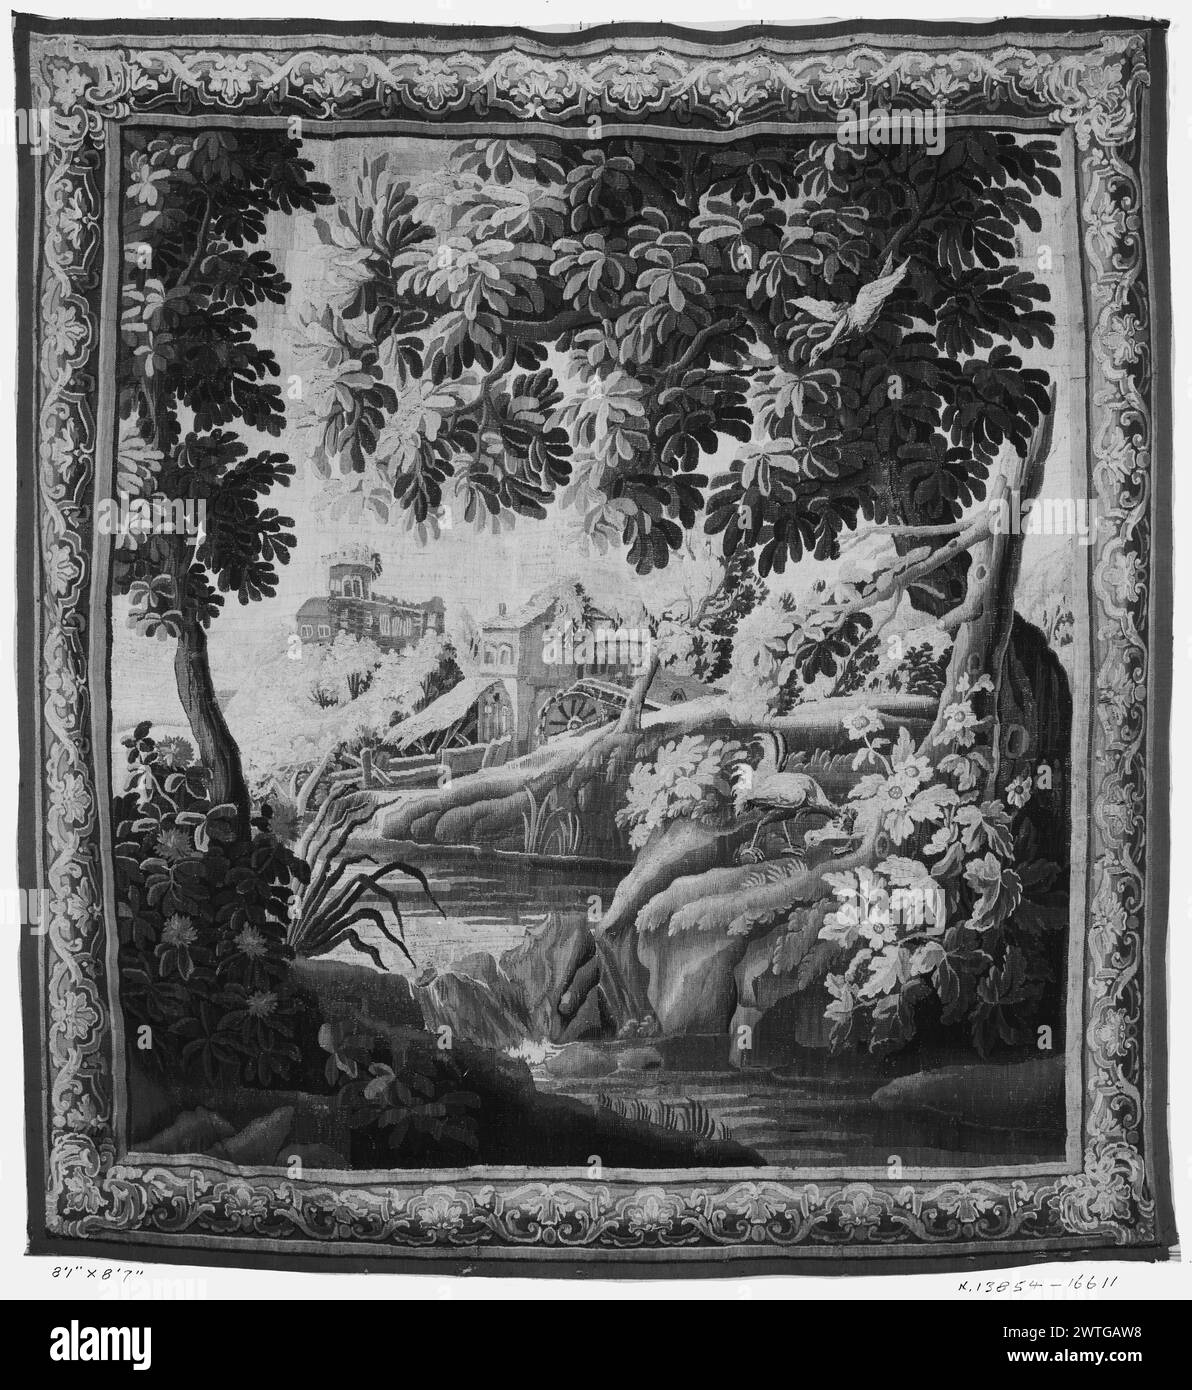 River landscape with watermill. unknown c. 1720-1760 Tapestry Dimensions: H 8'7' x W 8'1' Tapestry Materials/Techniques: unknown Culture: French Weaving Center: Aubusson Ownership History: French & Co. purchased from Dr. P. [Preston] P. [Pope] Satterwhite, invoiced 6/26/1929; sold to Rivas Eyzaguirre 3/12/1953. Fowl with other bird (R) near rocky waterfall, amongst flowering plants & trees; river in center leading to watermill with wheel & additional building on higher ground in distance (BRD) picture-frame border with continuous, scrolling brackets & acanthus leaves enclosing further acanthus Stock Photo